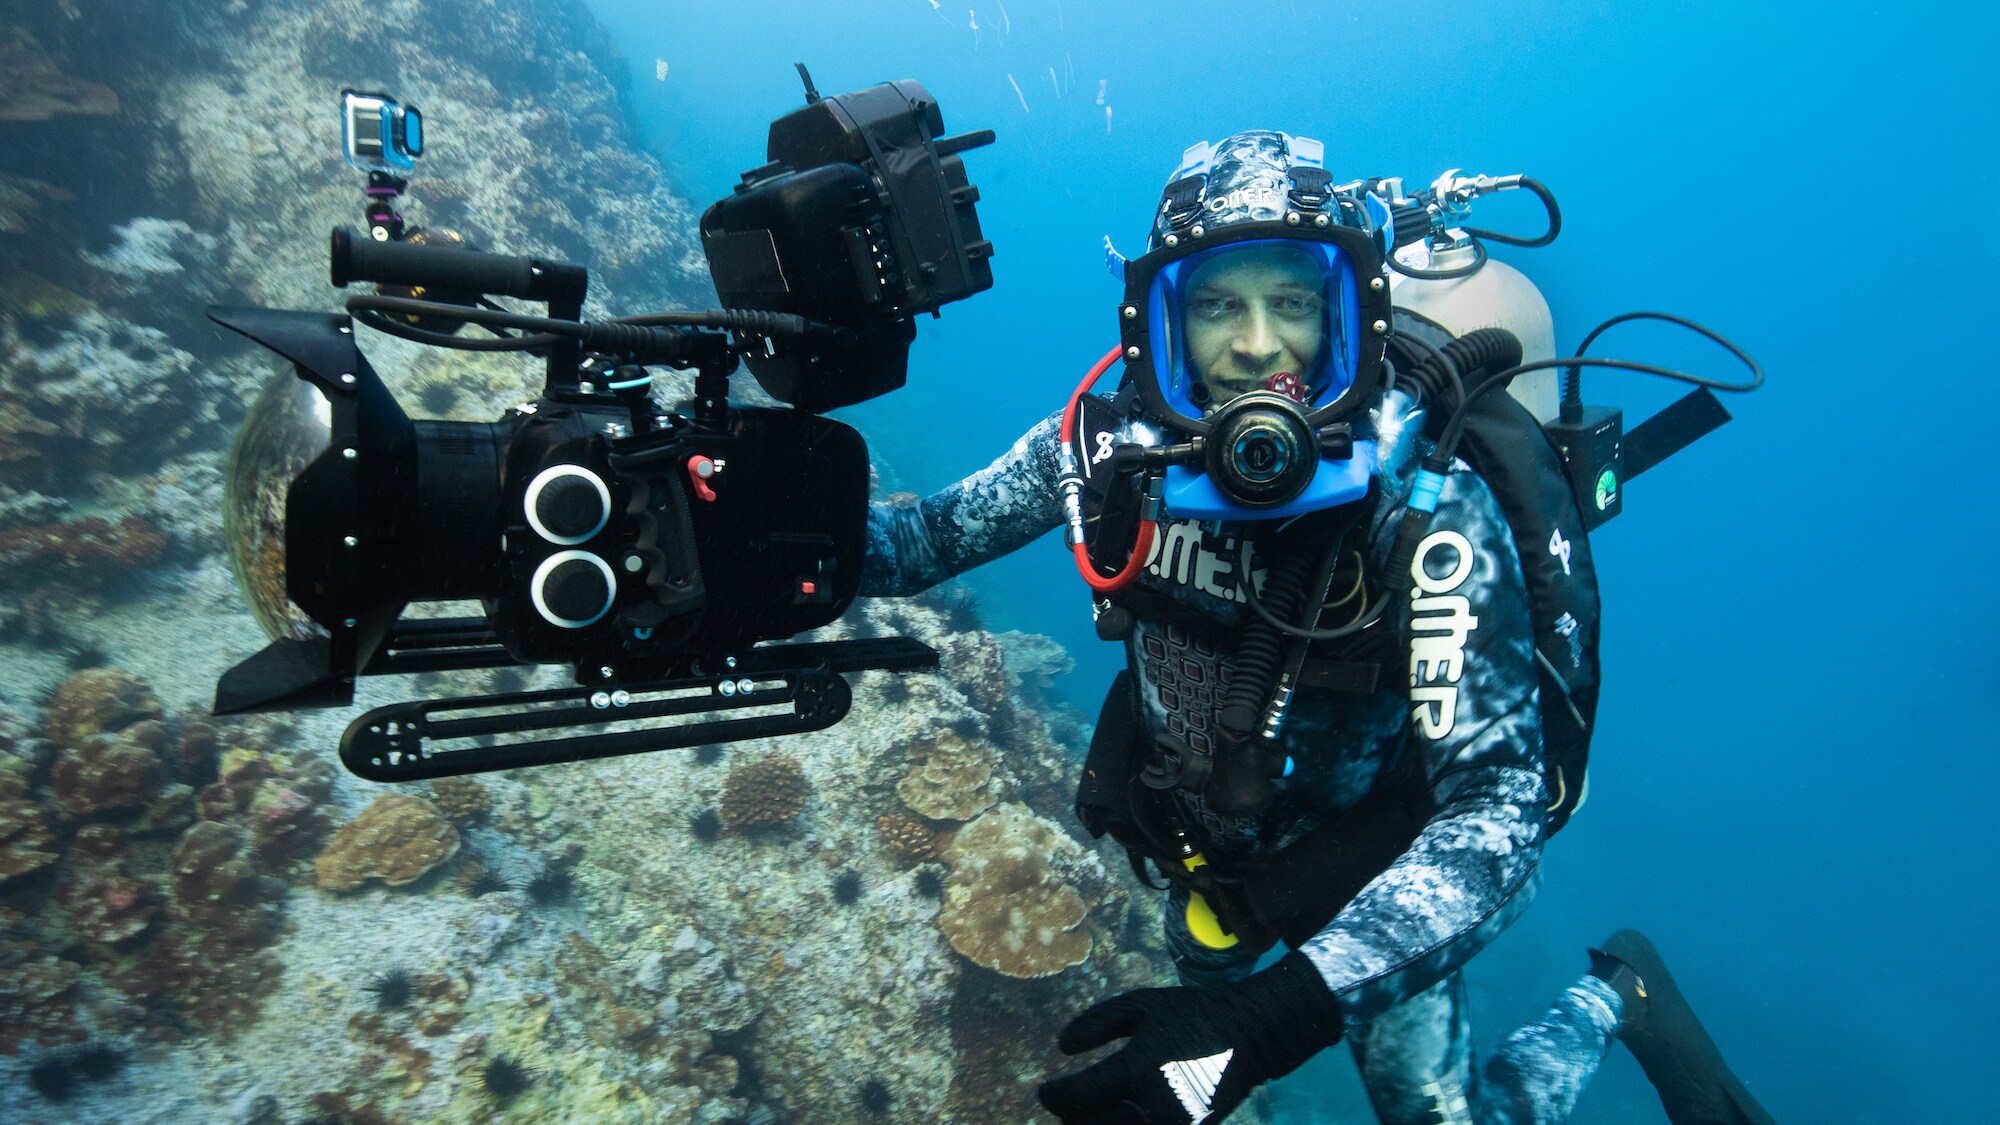 Bertie Gregory near reef with his camera. (Credit: National Geographic/Hugh Pearson for Disney+)